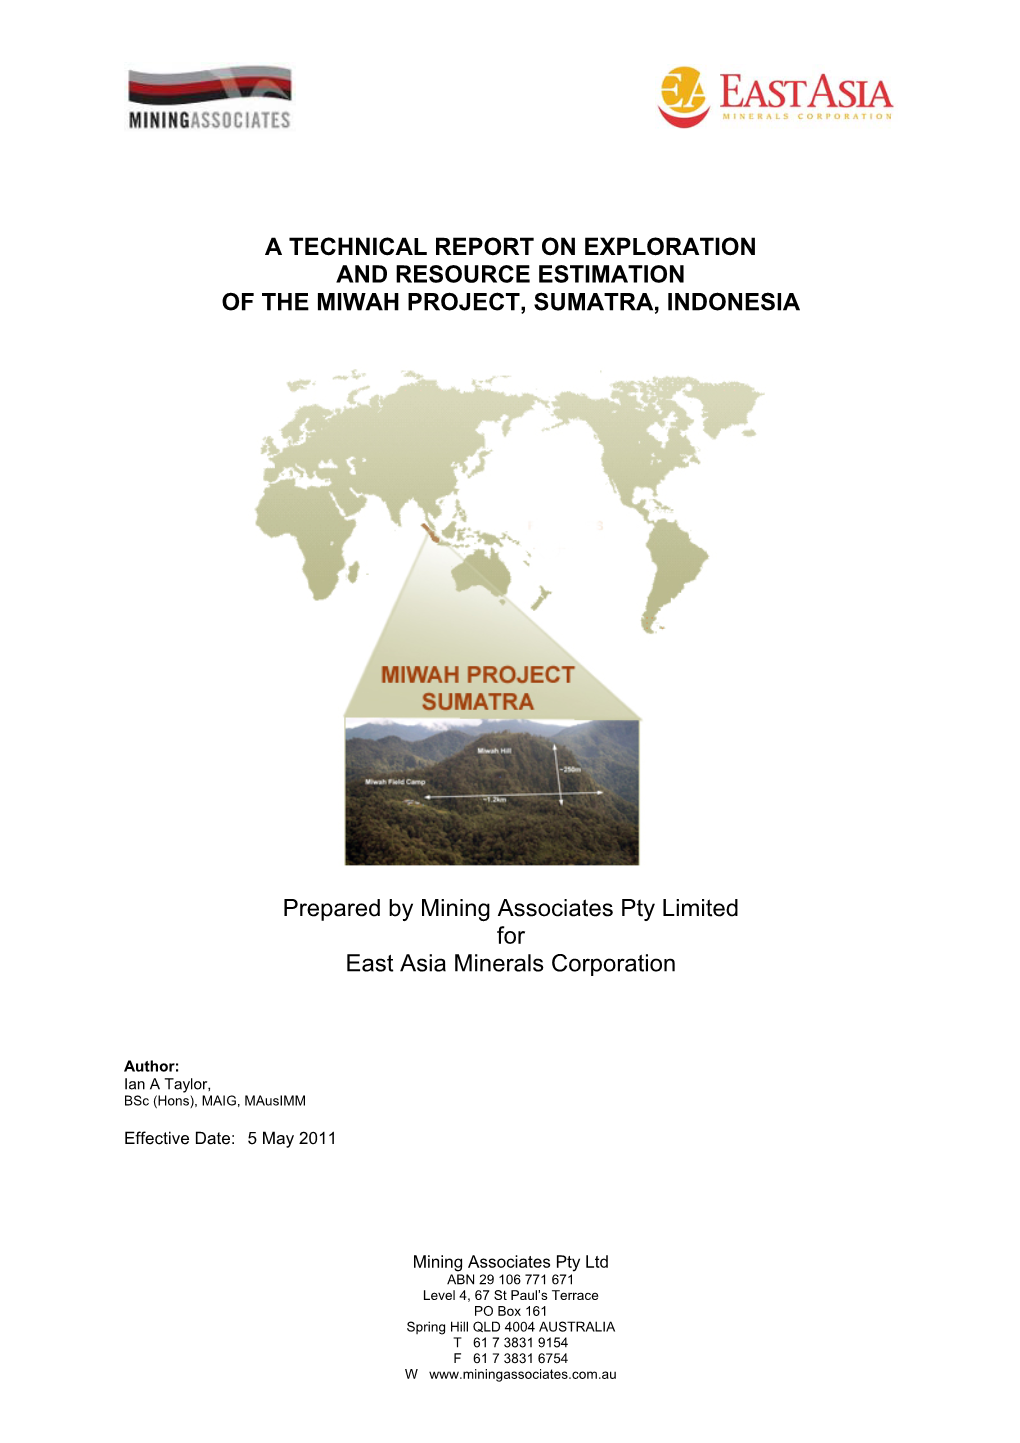 A Technical Report on Exploration and Resource Estimation of the Miwah Project, Sumatra, Indonesia